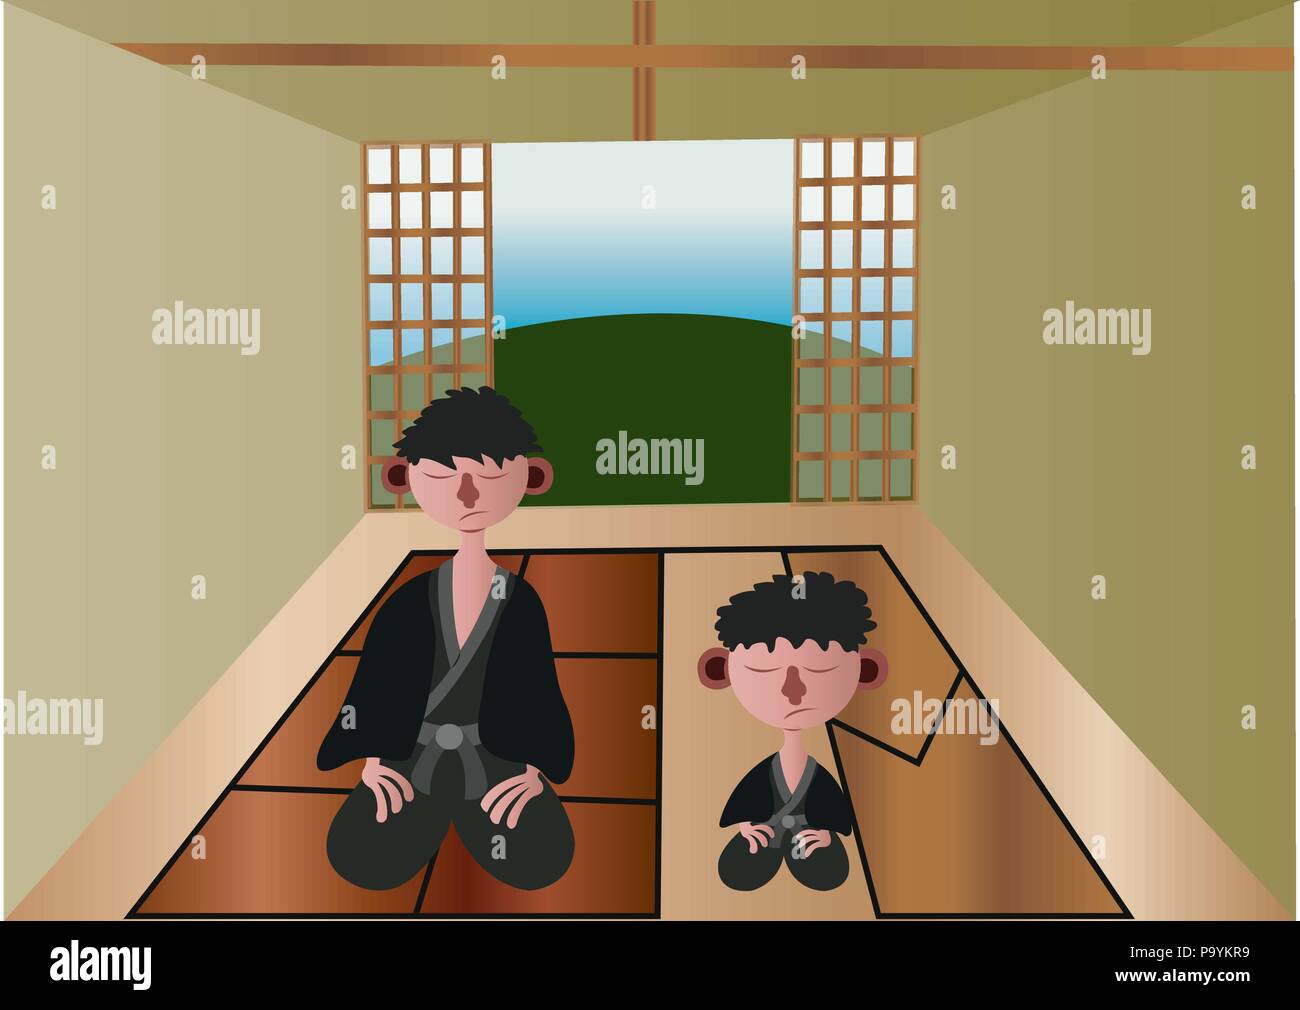 Japanese meditators relax in their house, Stock Vector